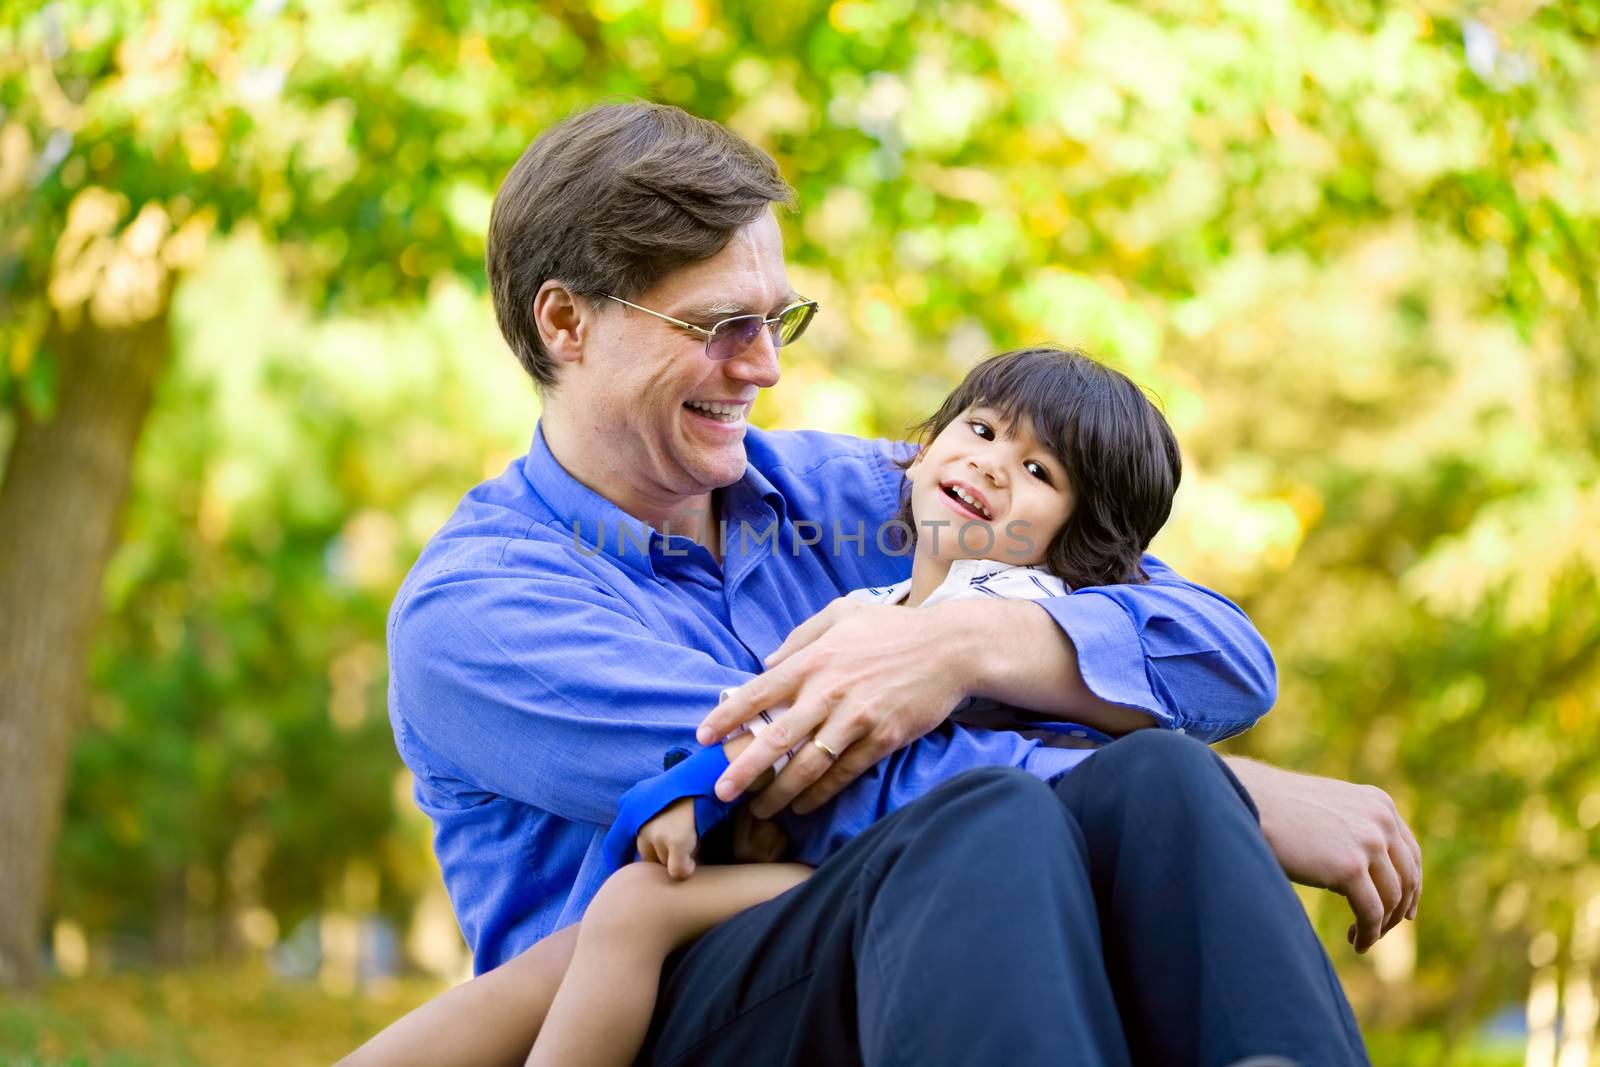 Businessman holding his disabled son on grass. Child has cerebral palsy.